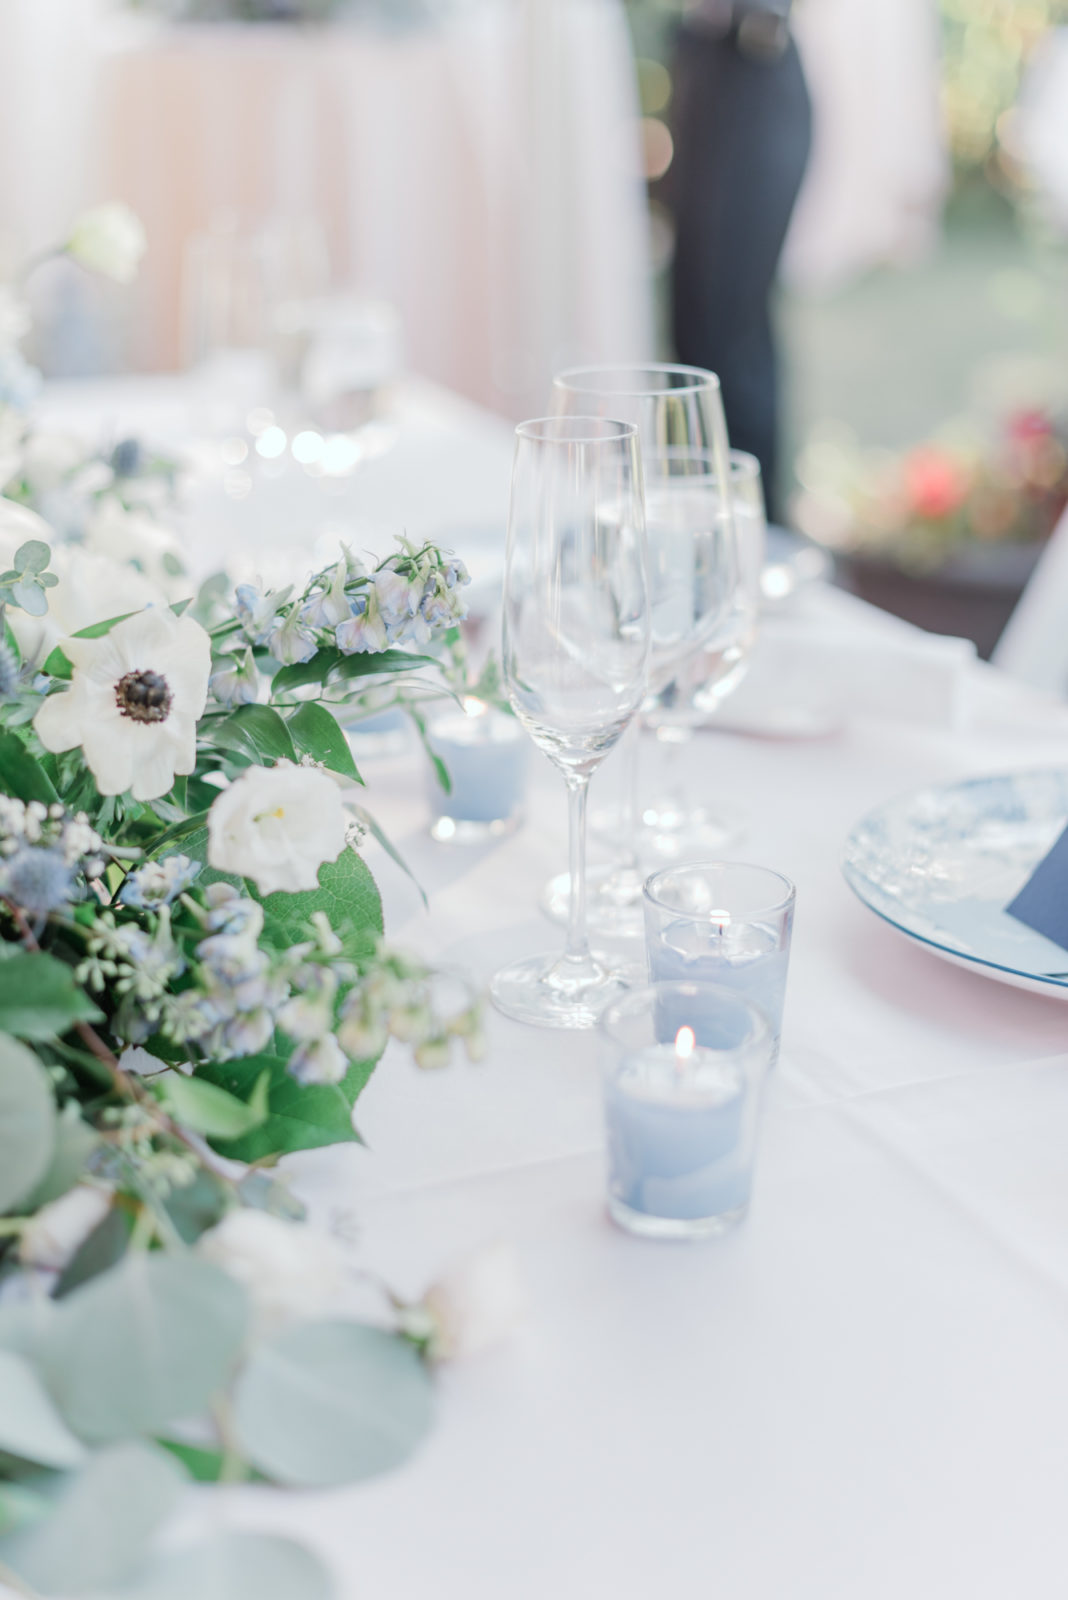 Pale blue and white wedding reception decor inspiration for a fine art wedding